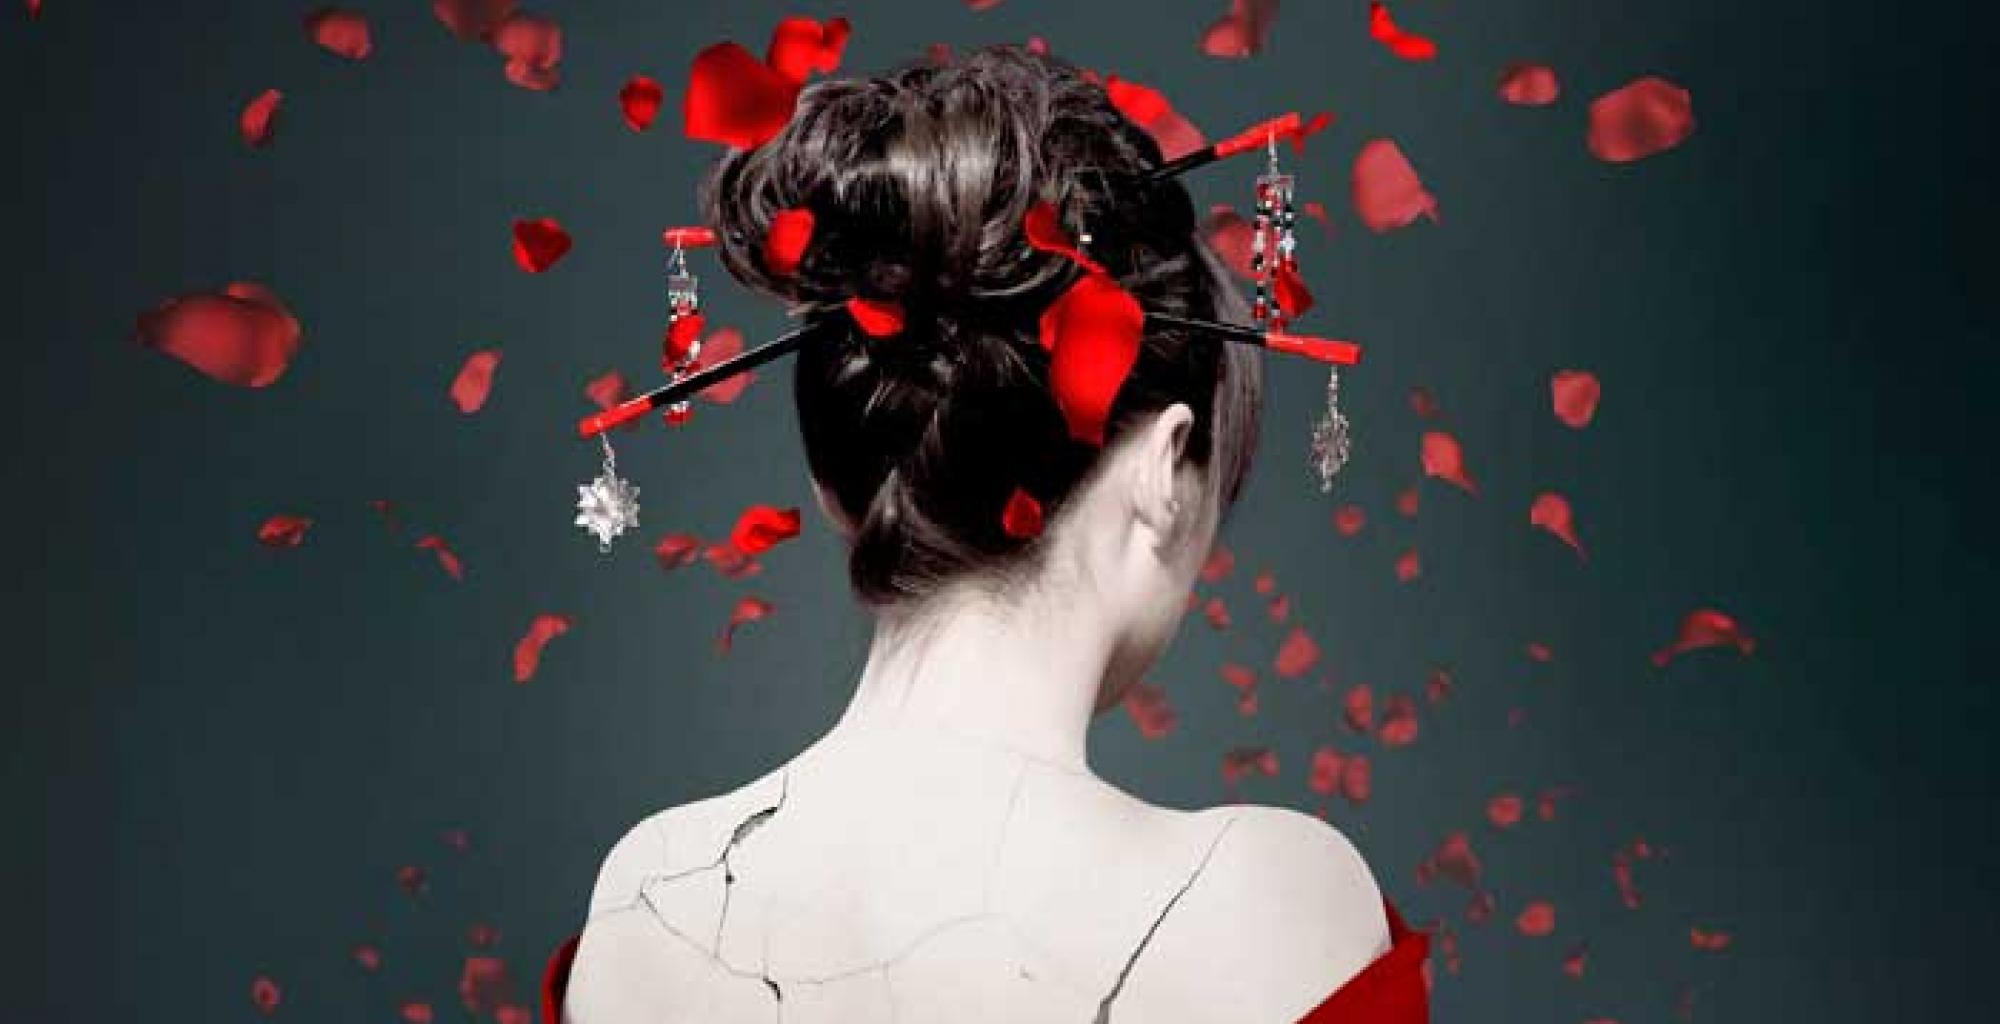 Palace Opera And Ballet Screens Royal Opera’s “Emotionally Shattering” Madame Butterfly